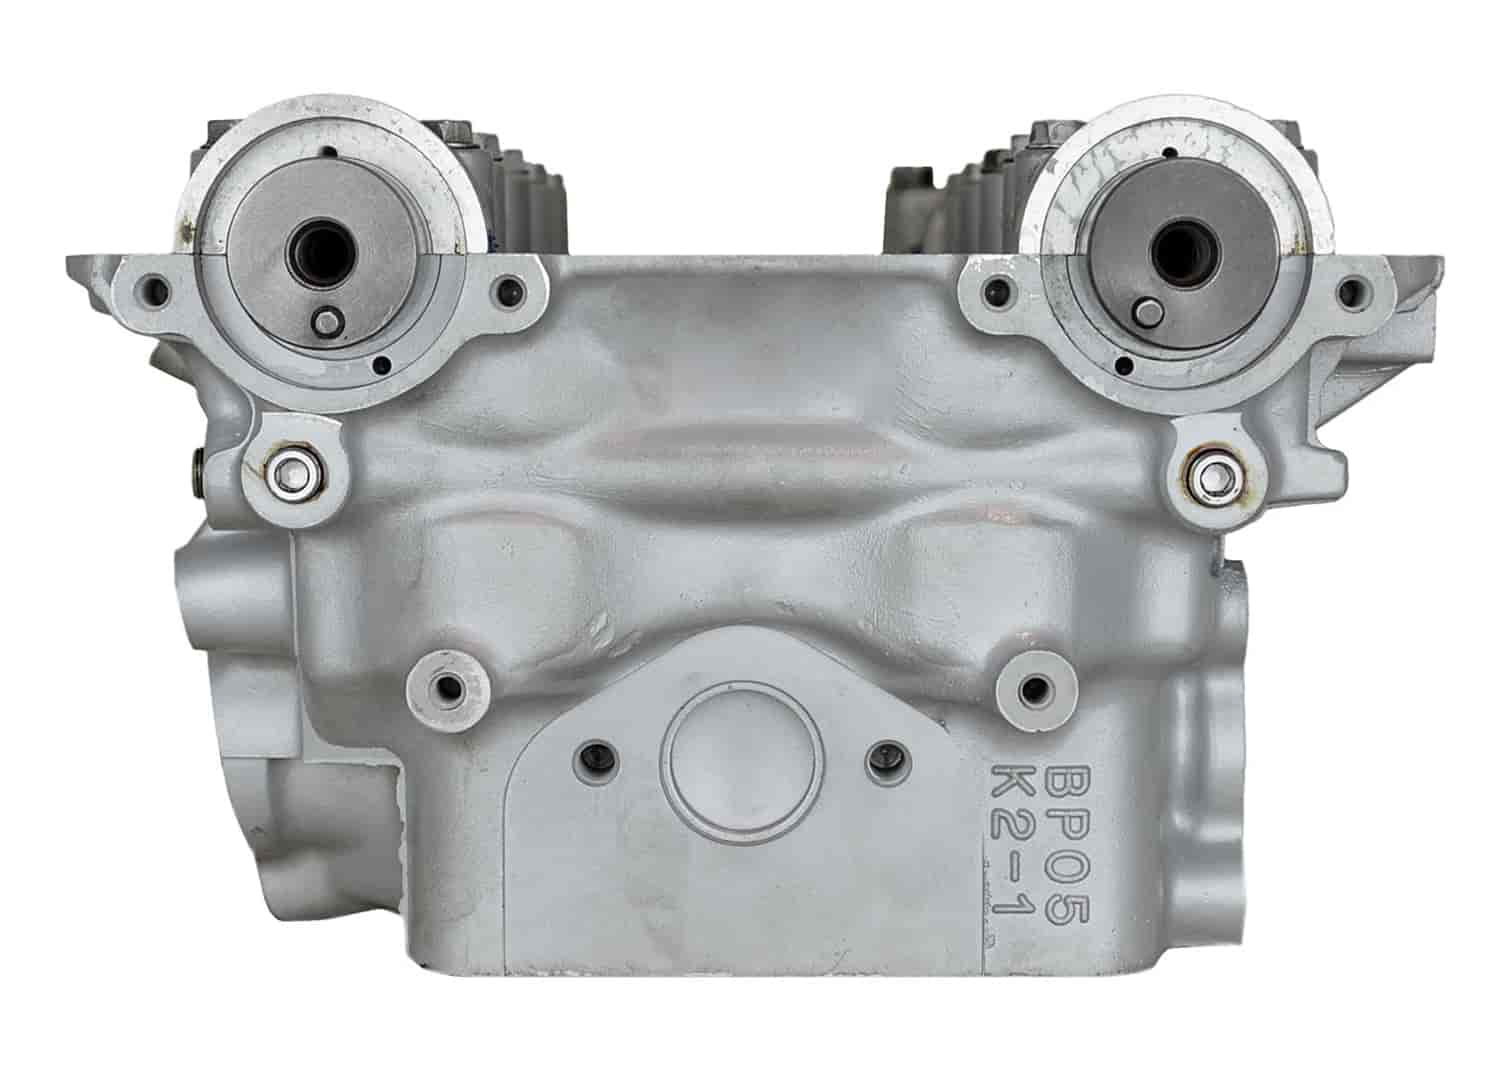 Remanufactured Cylinder Head for 1990-1997 Ford/Kia/Mazda/Mercury with 1.8L L4